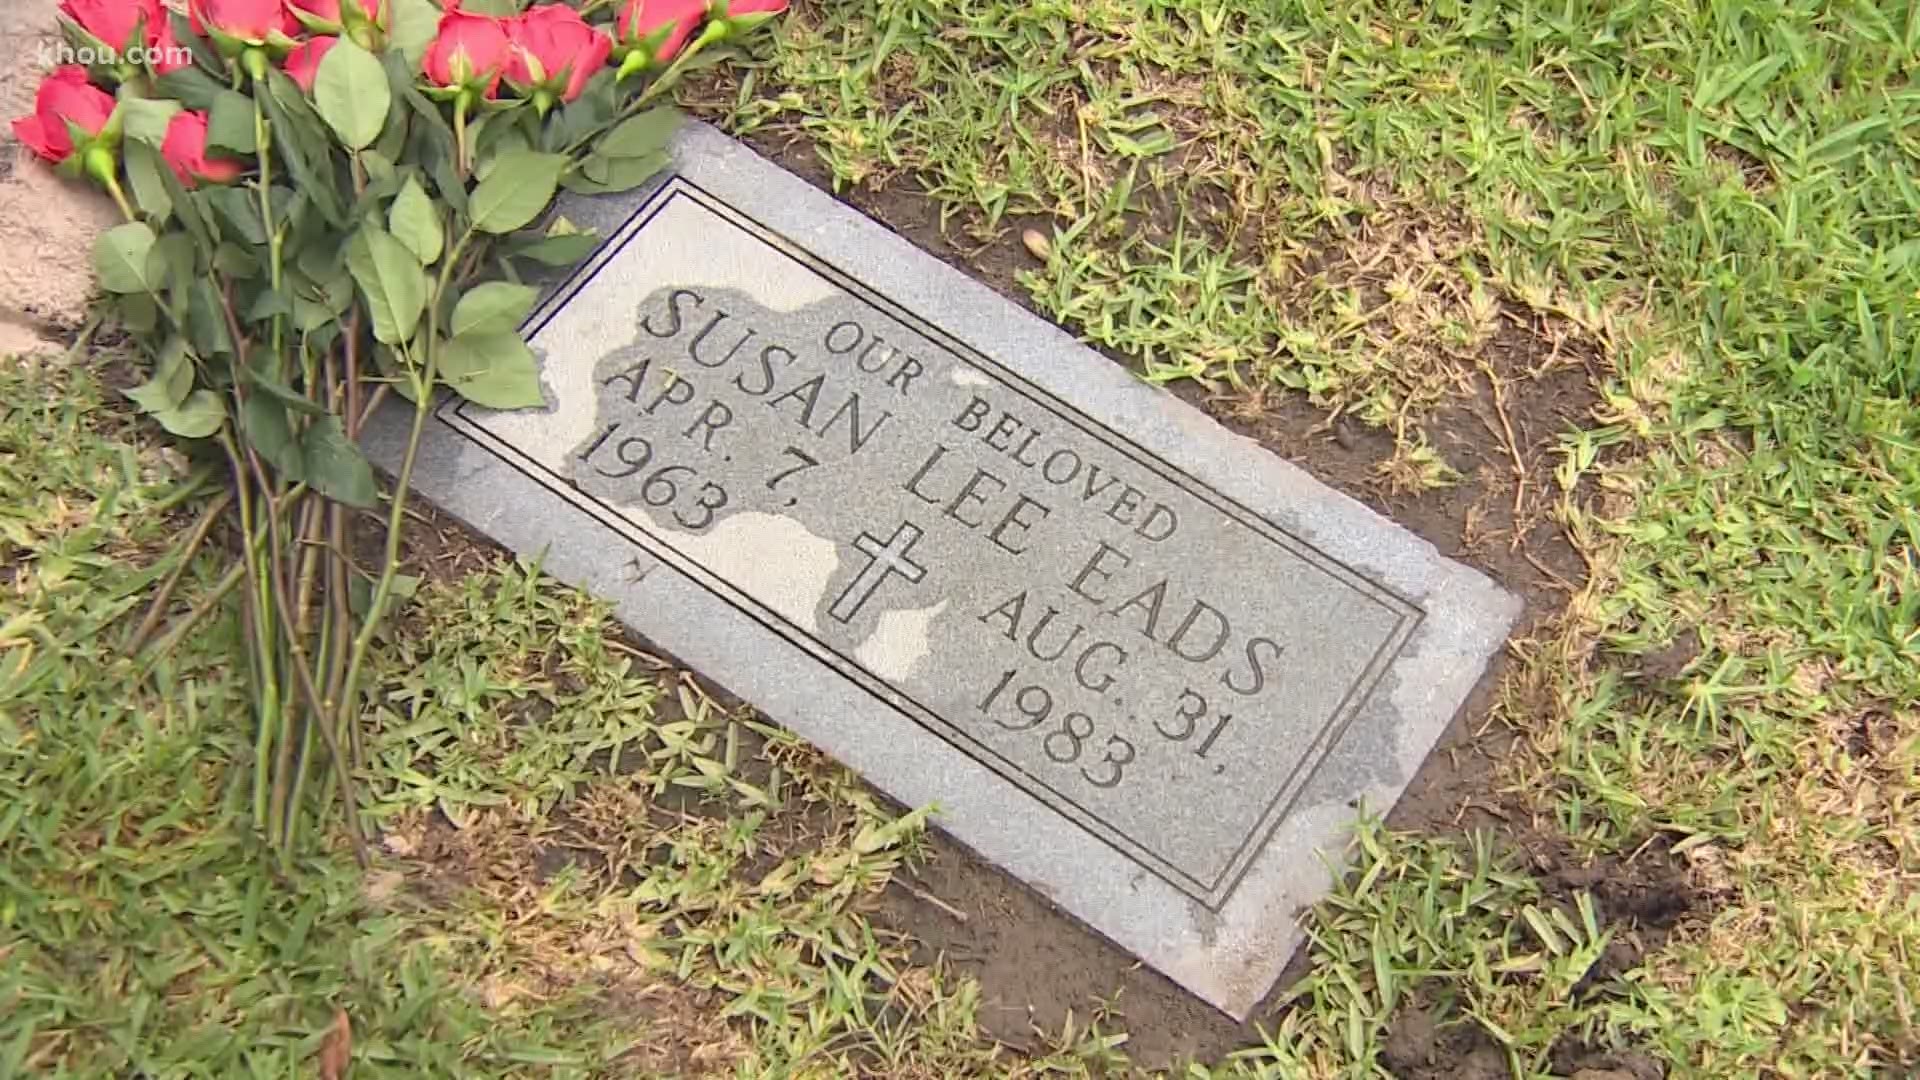 The family of Susan Eads and the investigators who broke the case on her murder gathered Friday to places roses on her grave.